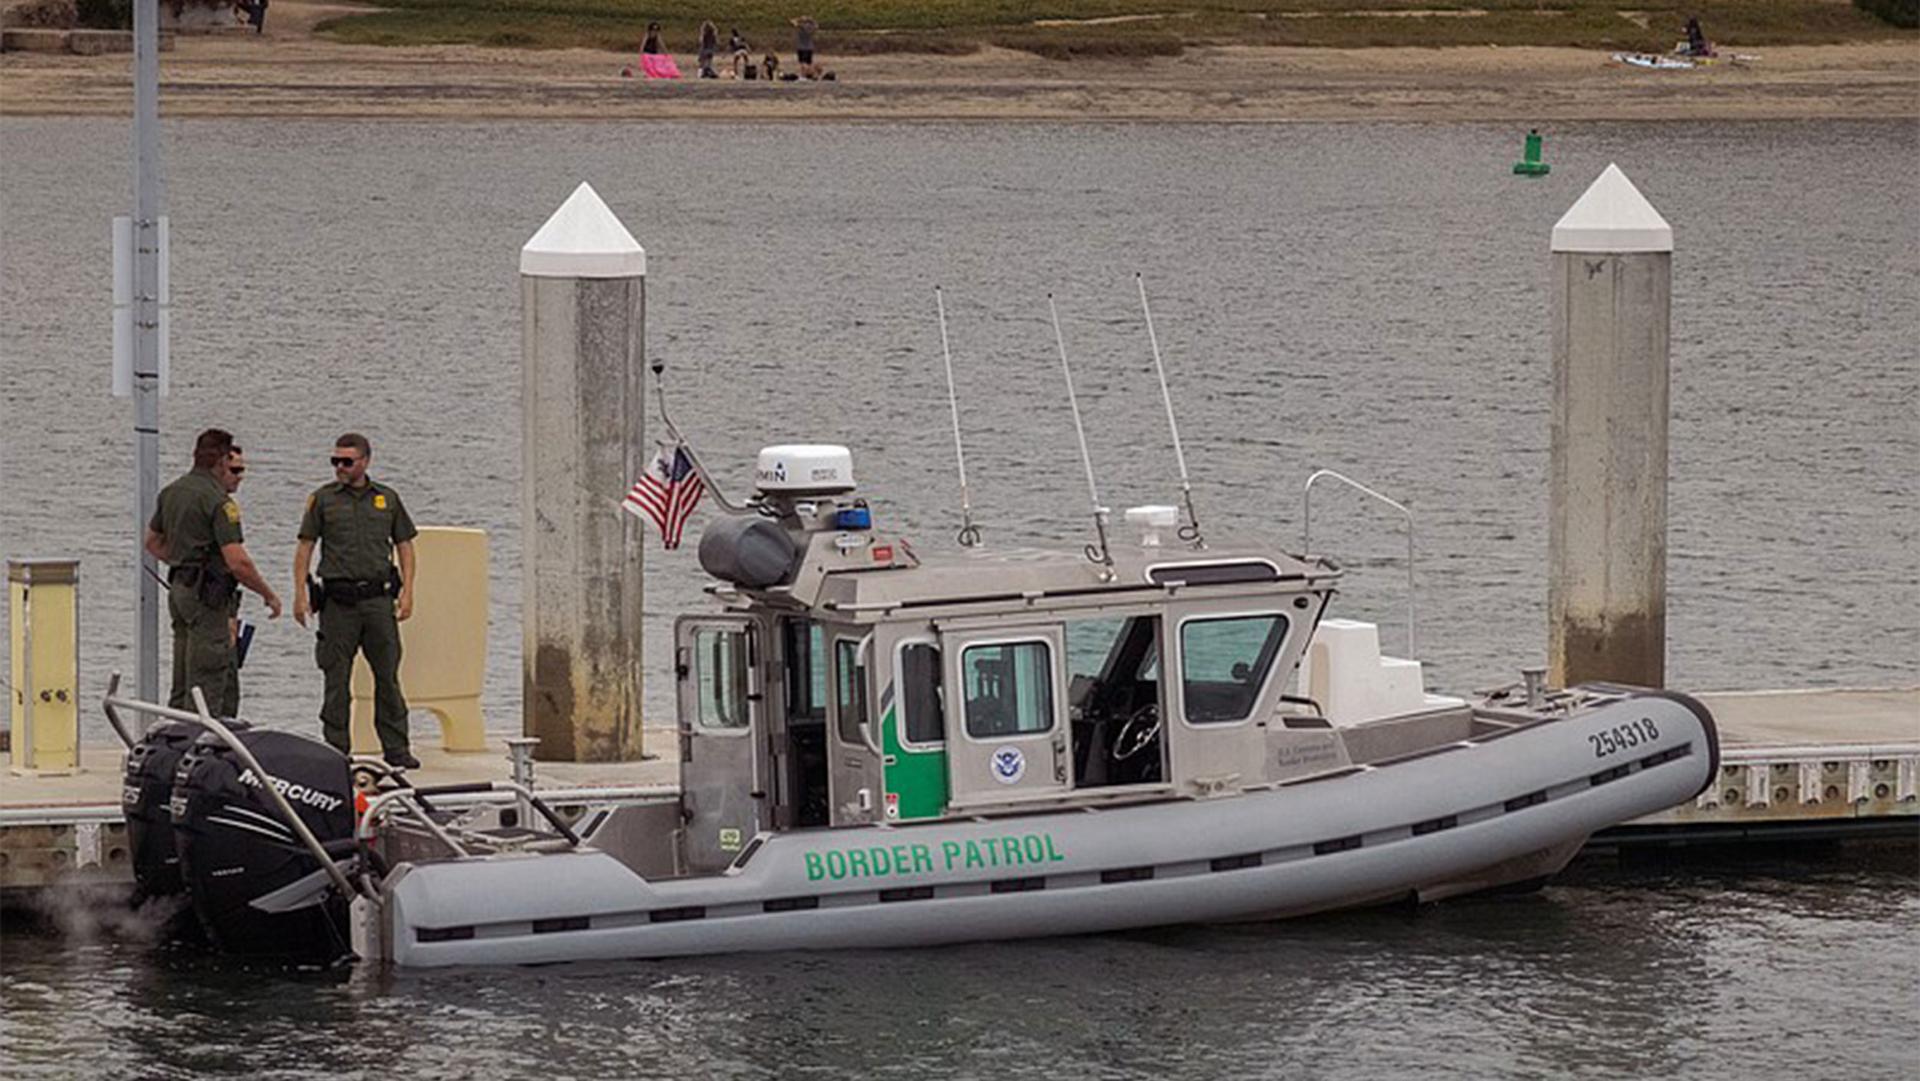 Three men in green suits stand on a small boat that says "Border Patrol" with an American flag in the middle